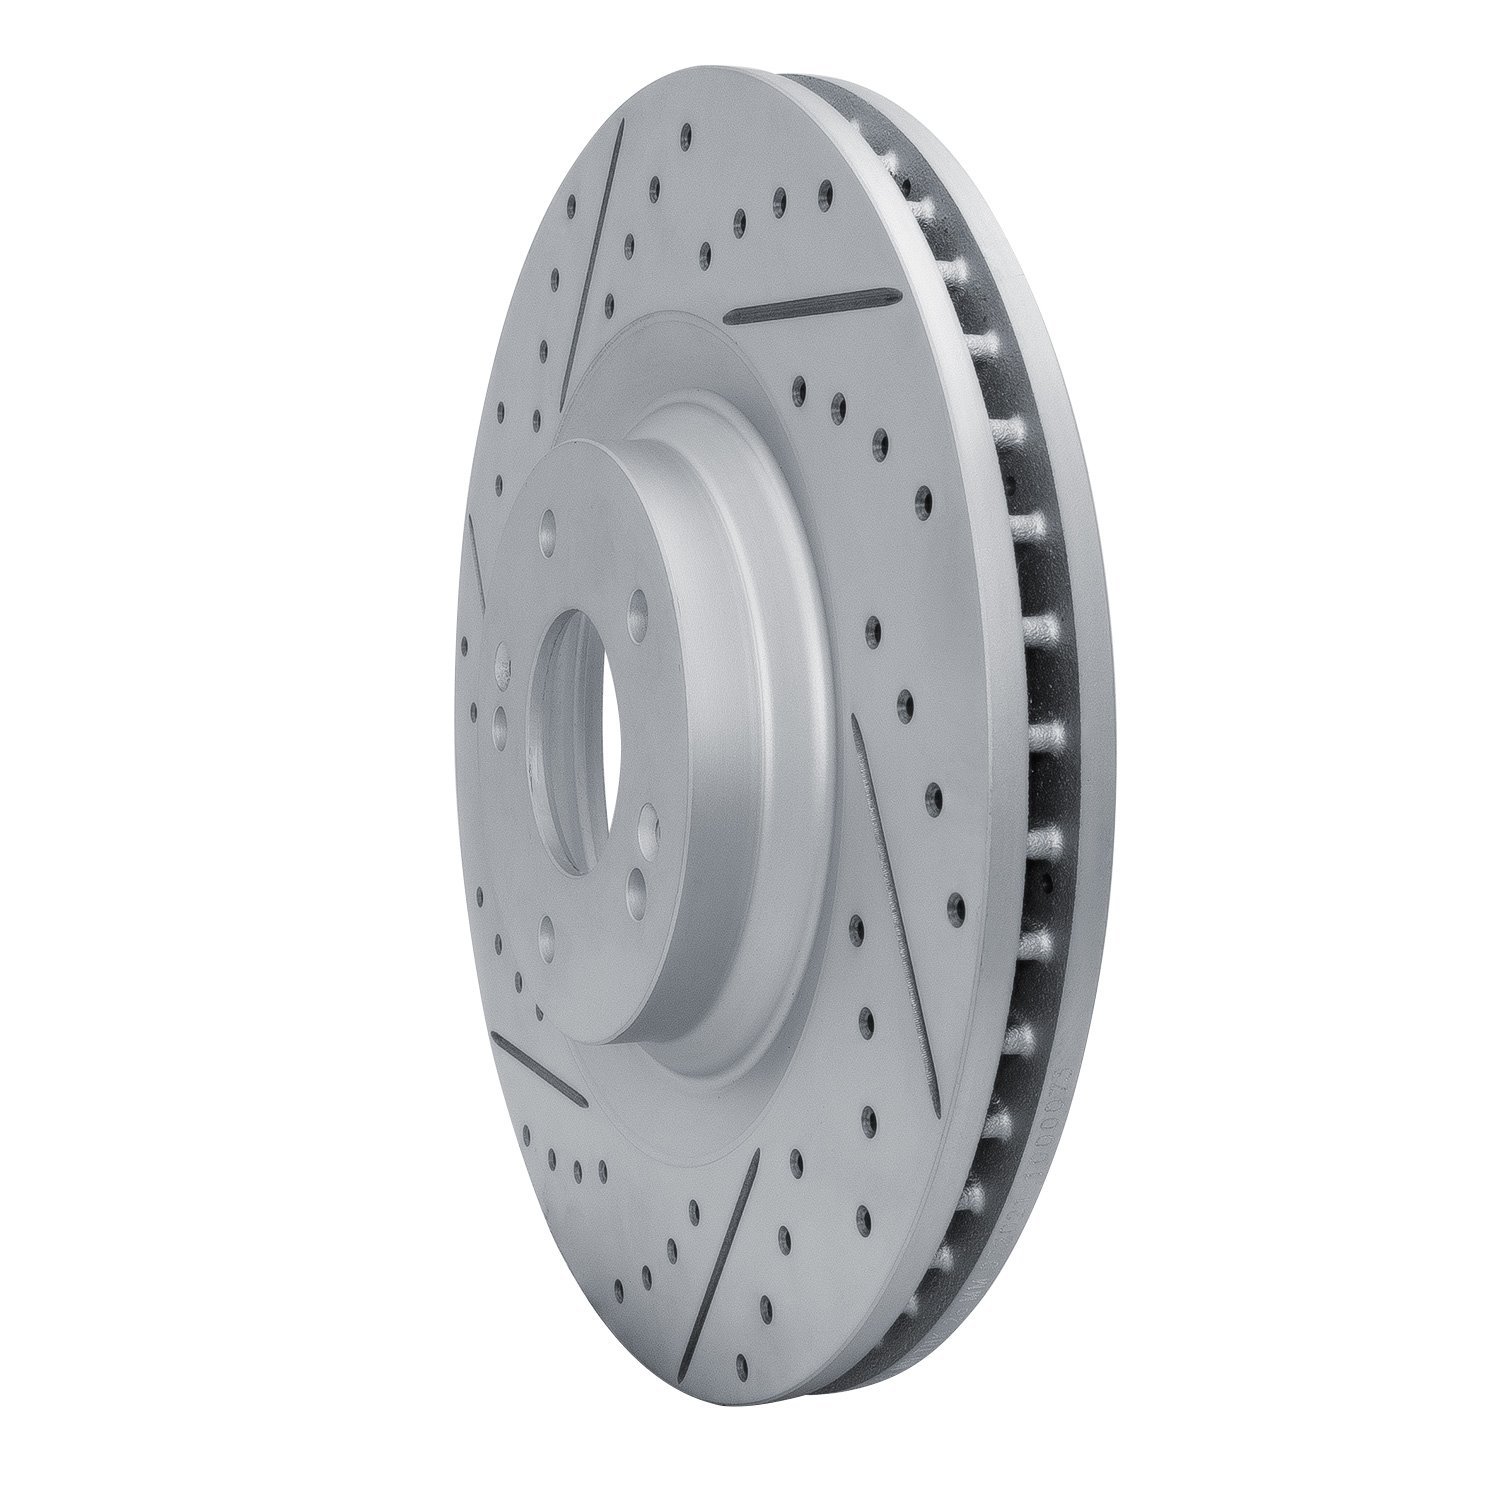 830-03061L Geoperformance Drilled/Slotted Brake Rotor, Fits Select Kia/Hyundai/Genesis, Position: Front Left